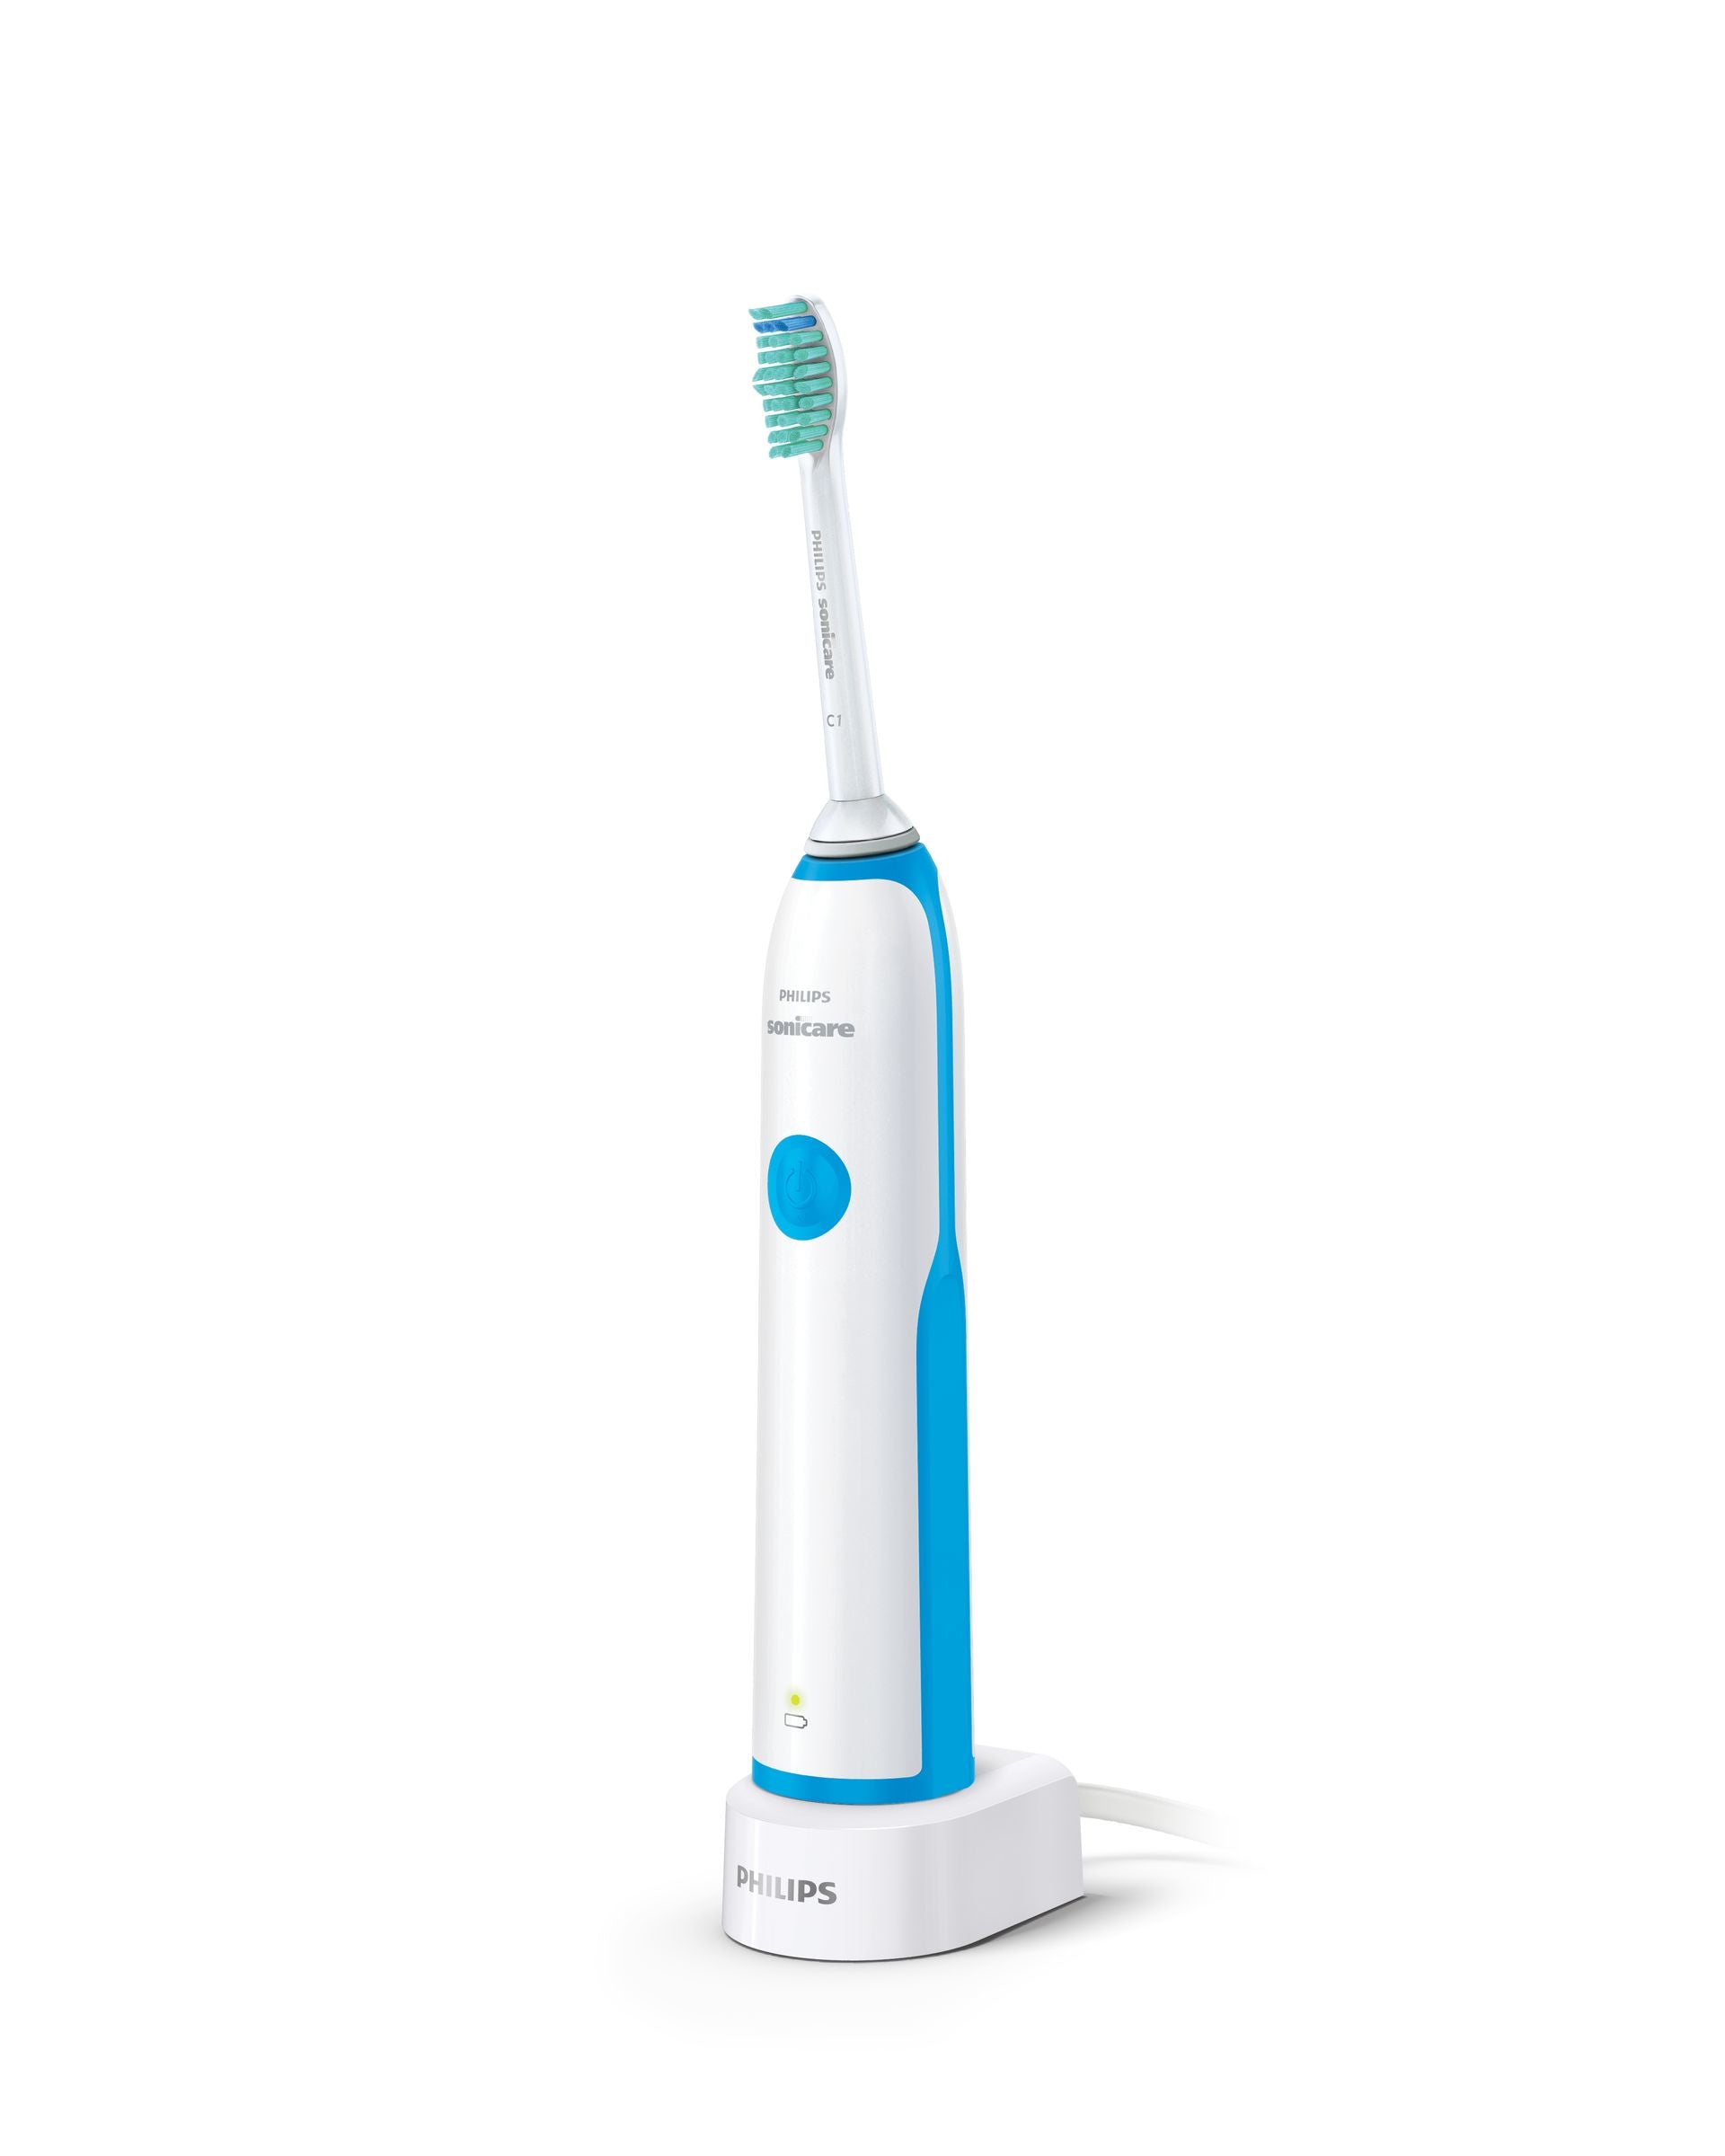 Philips Sonicare Electric Toothbrush Hx3215/08